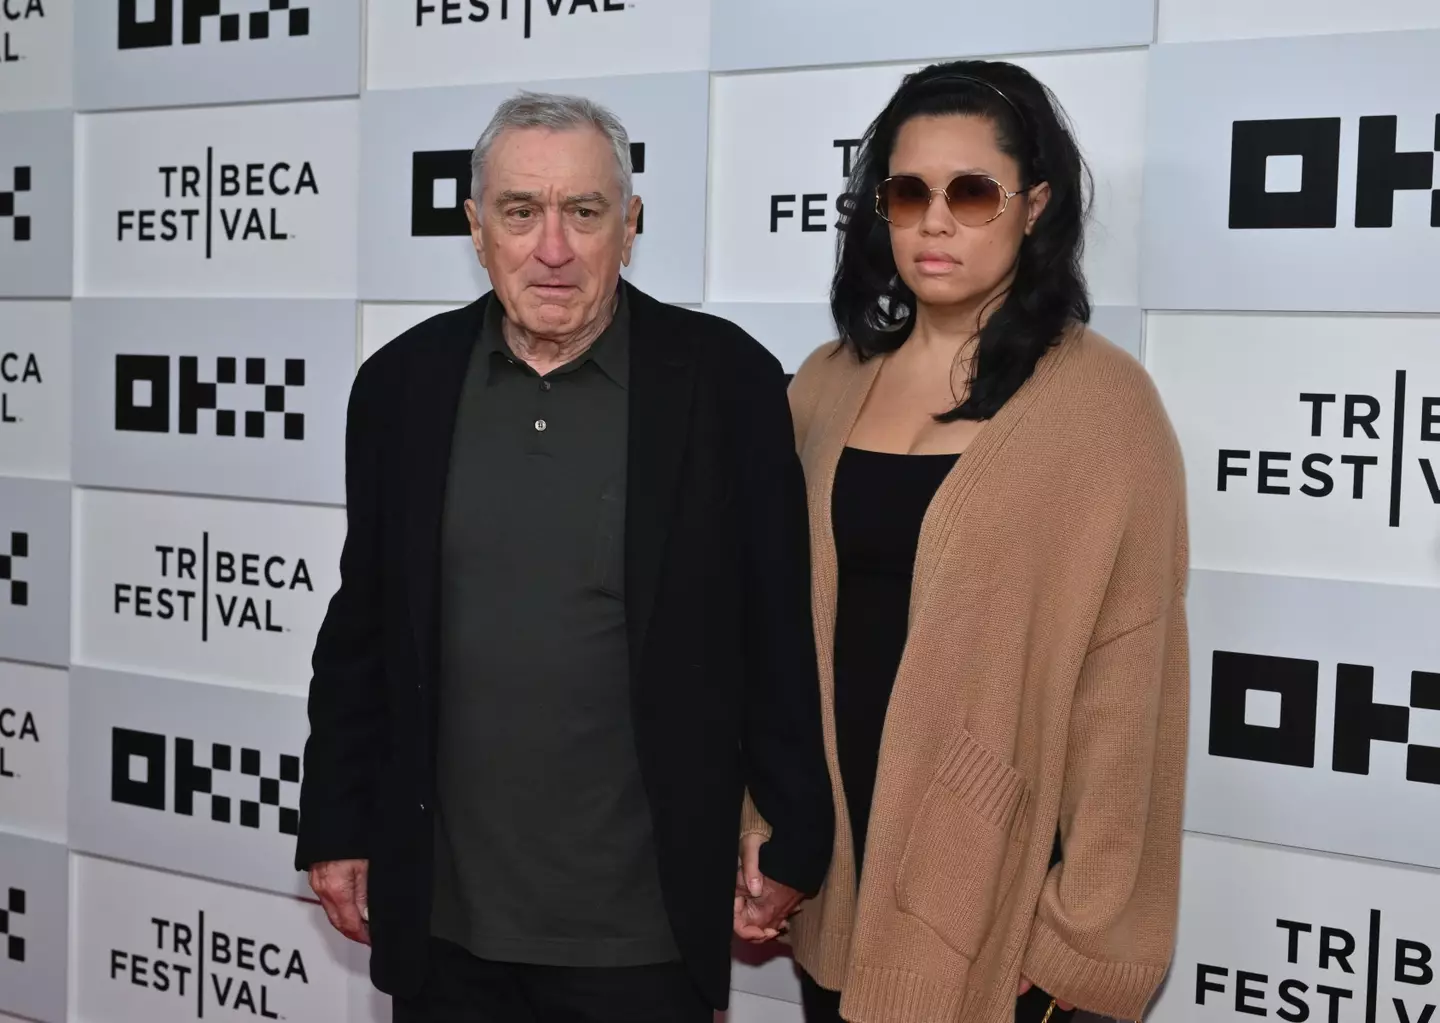 Tiffany Chen has received 'nasty' comments about her and Robert De Niro's relationship.